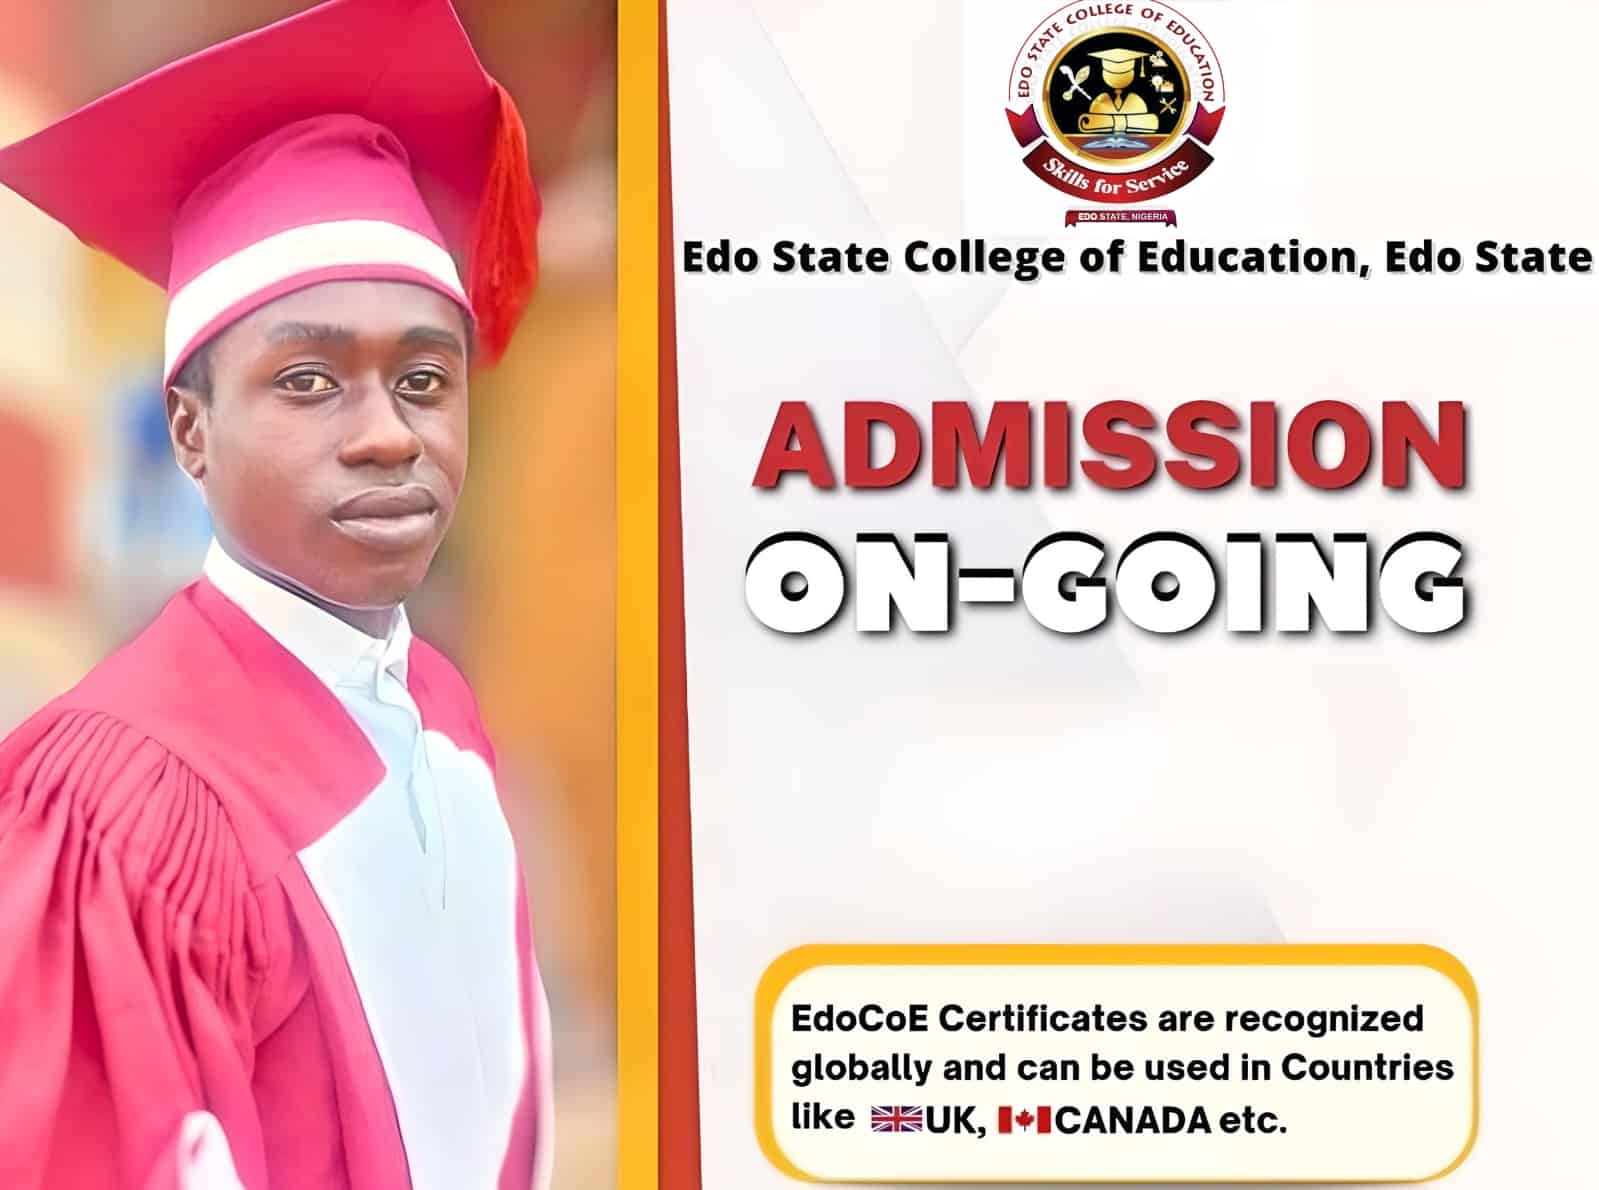 Edo State College of Education (EDOCOE) Pre-NCE Admission